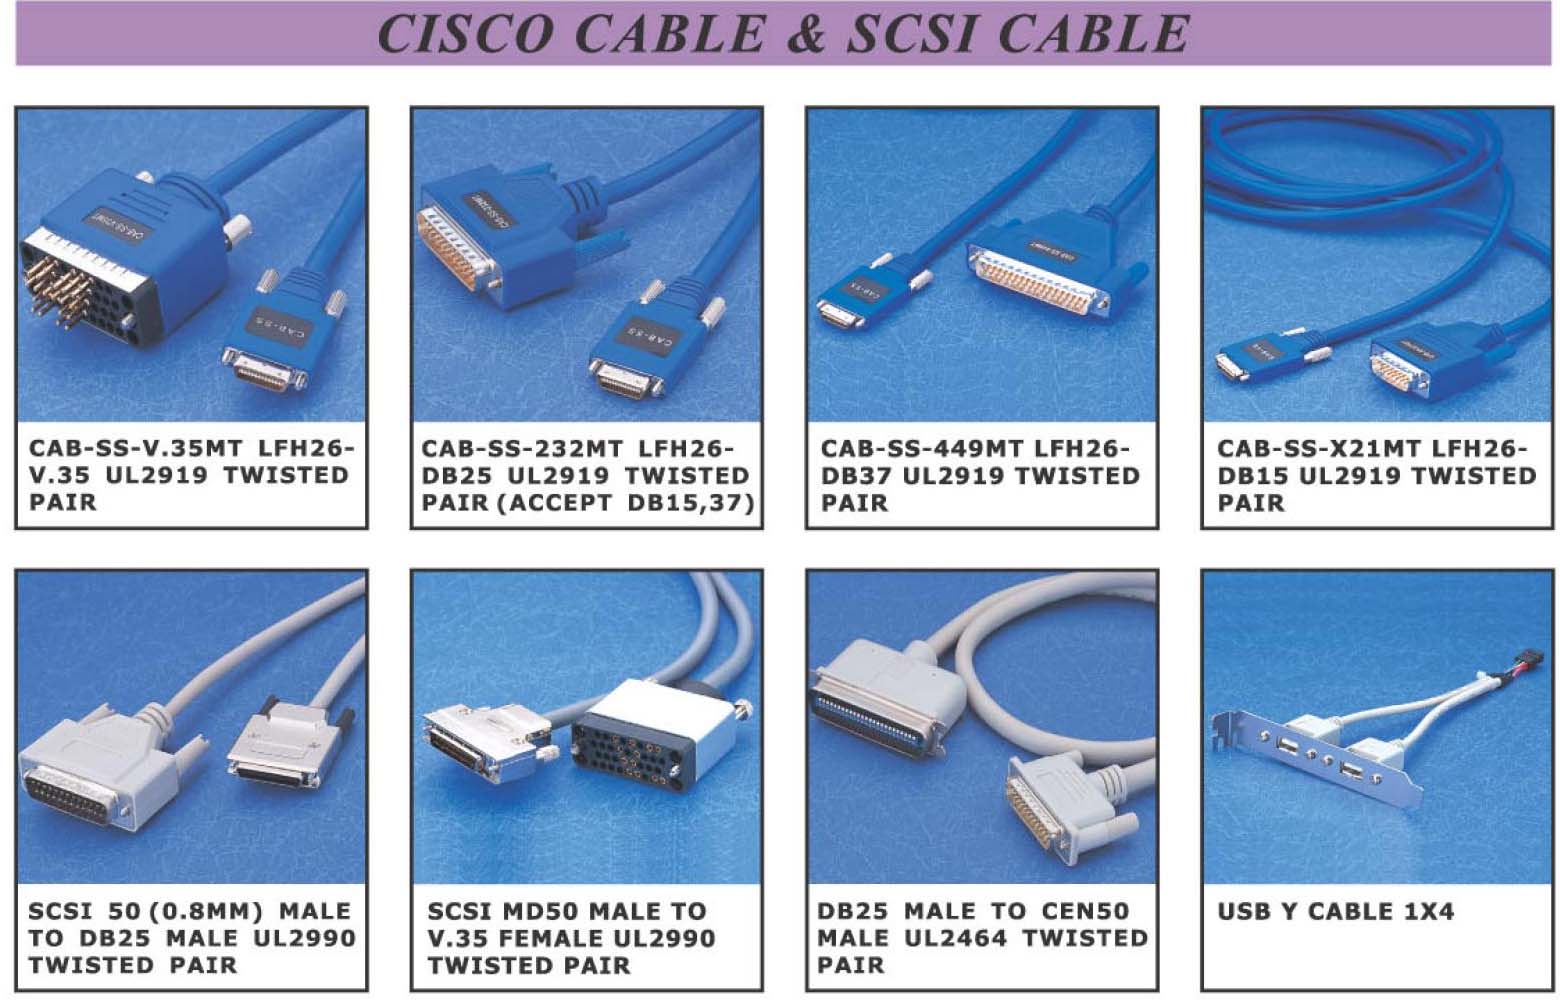 Connector, CableAssembly, WireHarness, PowerBank, WebCam,CISCOCable